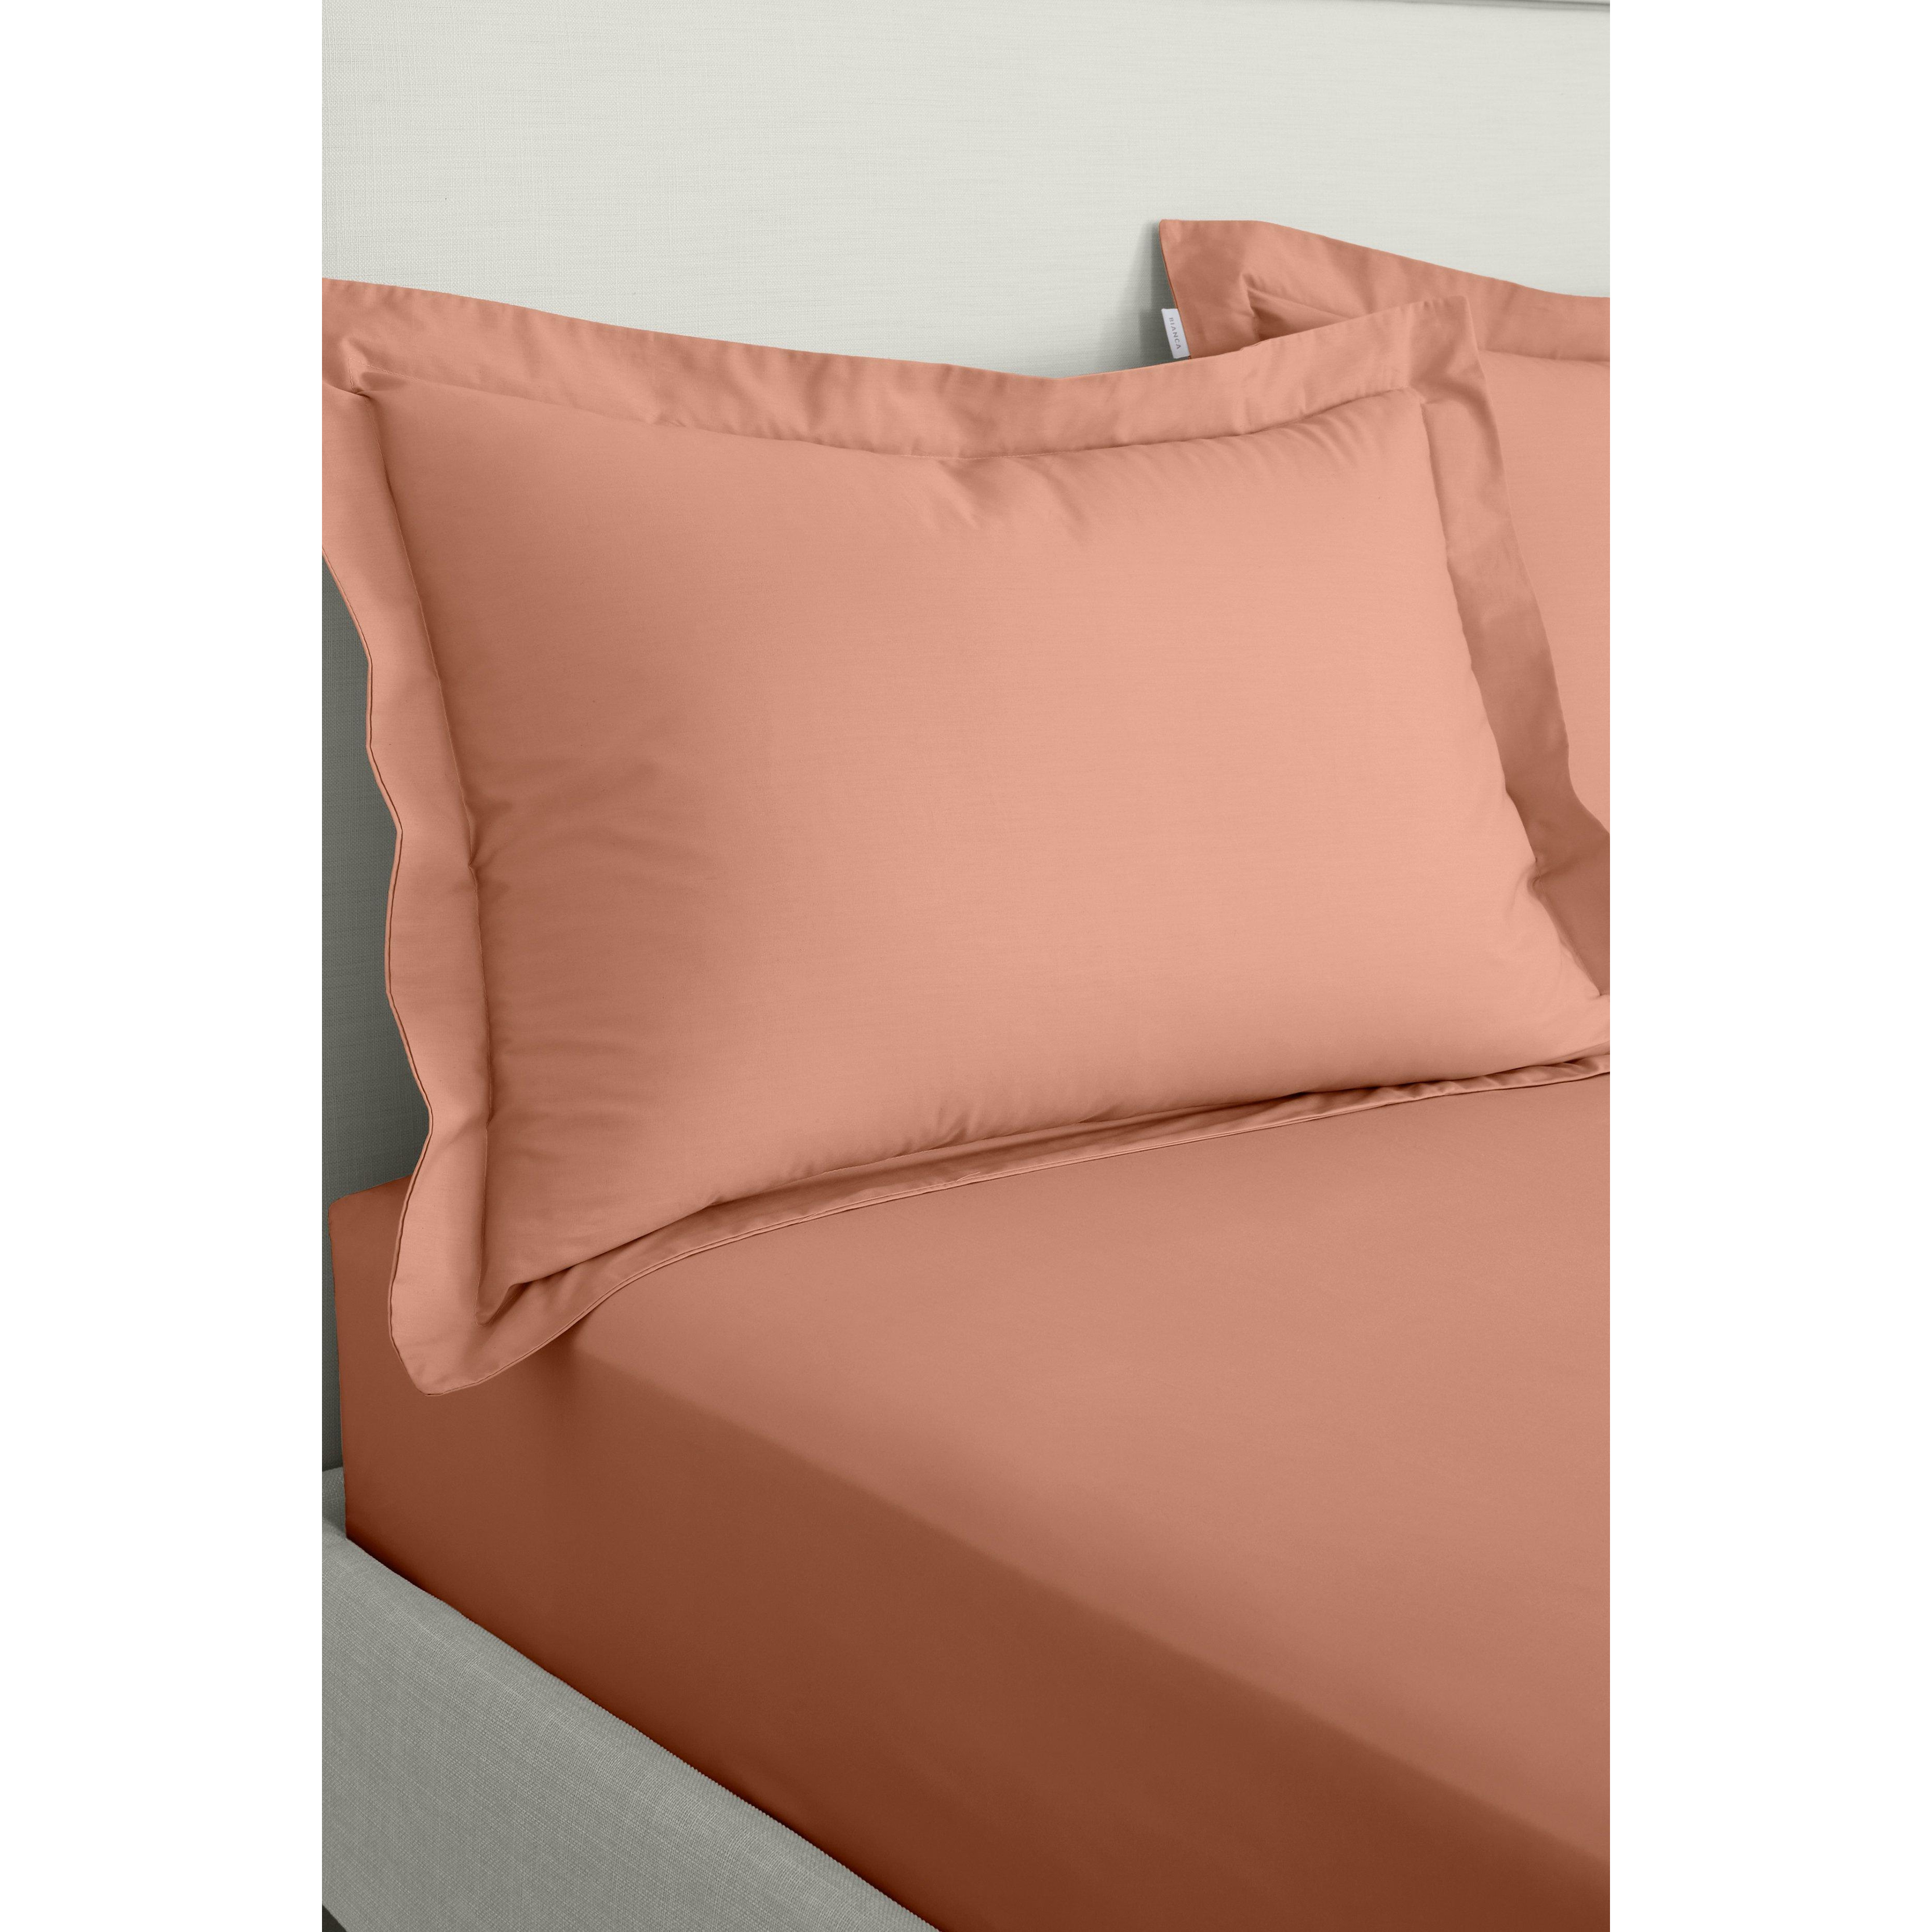 '200 Thread Count Cotton Percale' Oxford Pillowcases - image 1